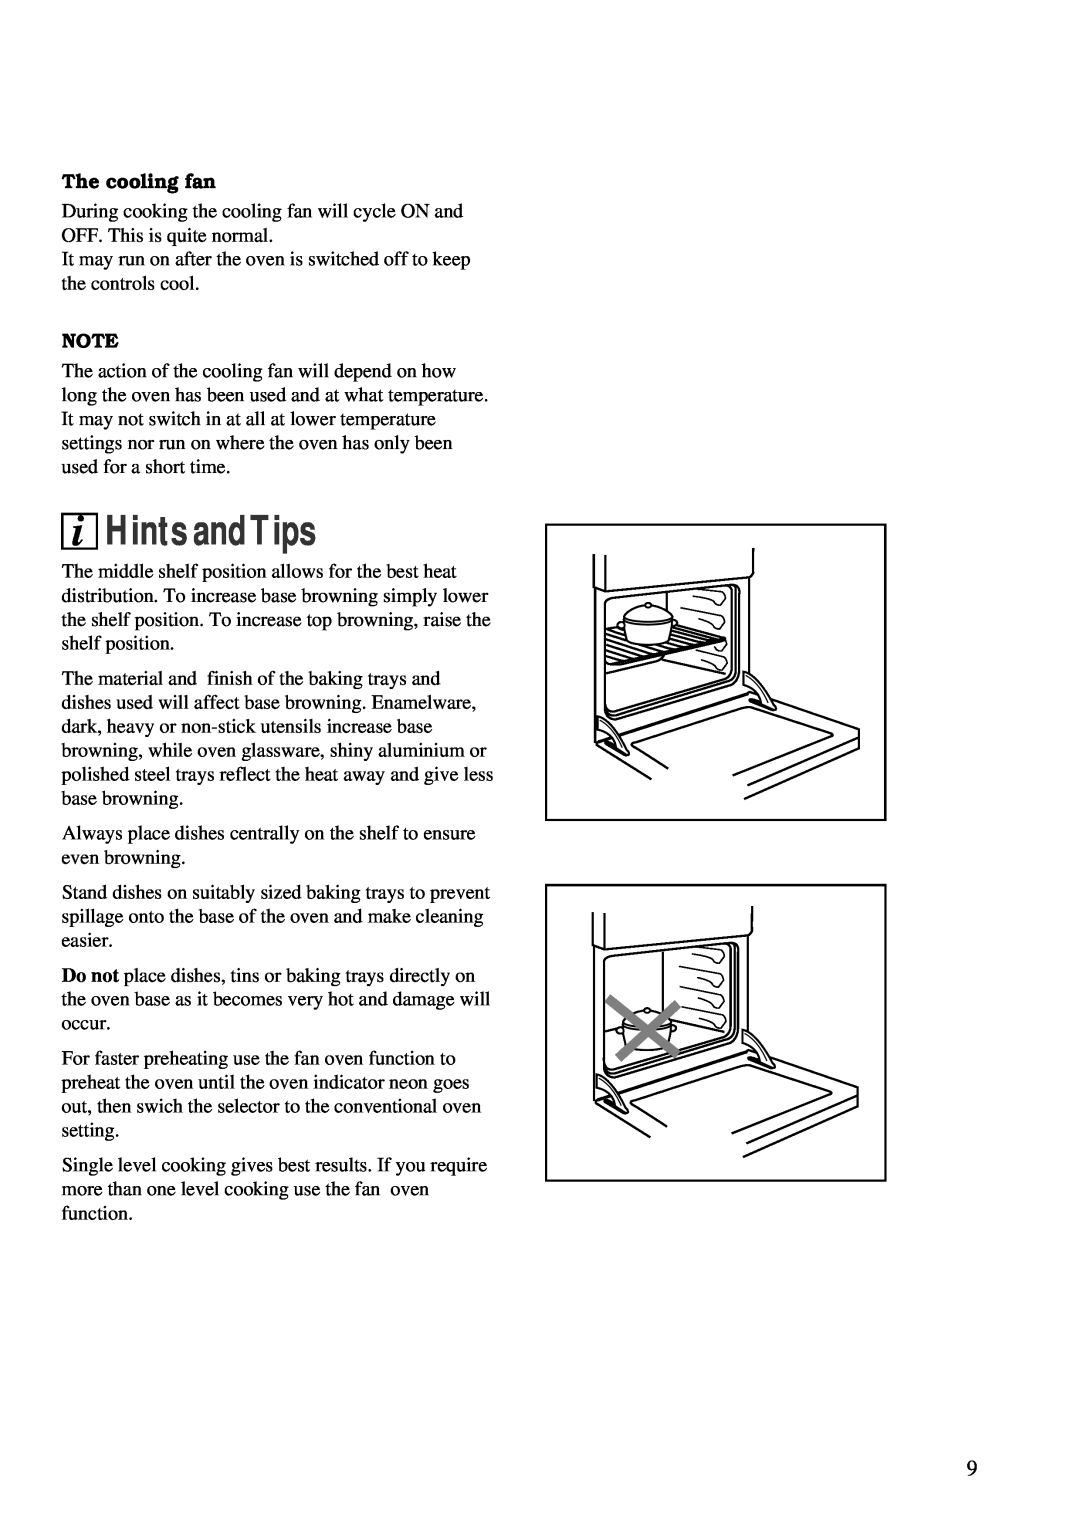 Zanussi ZBC 748 installation manual Hints andTips, The cooling fan 